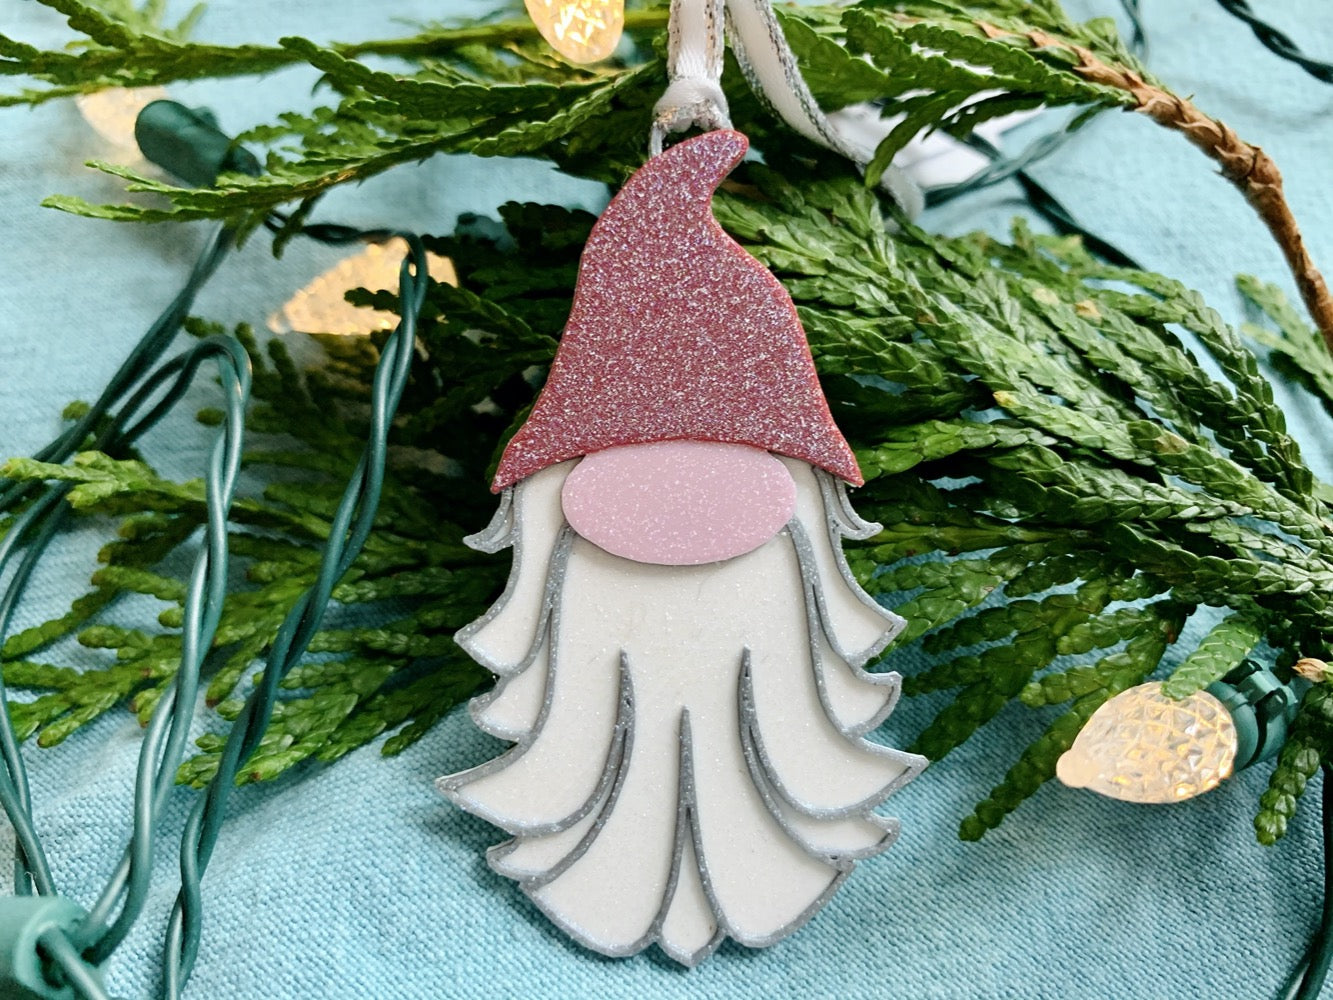 On a bright blue fabric background there are evergreen branches and a string of lights. Resting on these is a R+D 3D printed ornament. This ornament is shaped like a gnome, elf, or plump santa. It has a red pointed hat, a big pink nose, and a white and silver beard. The entire ornament is covered in glitter to be able to shimmer and shine in the light.